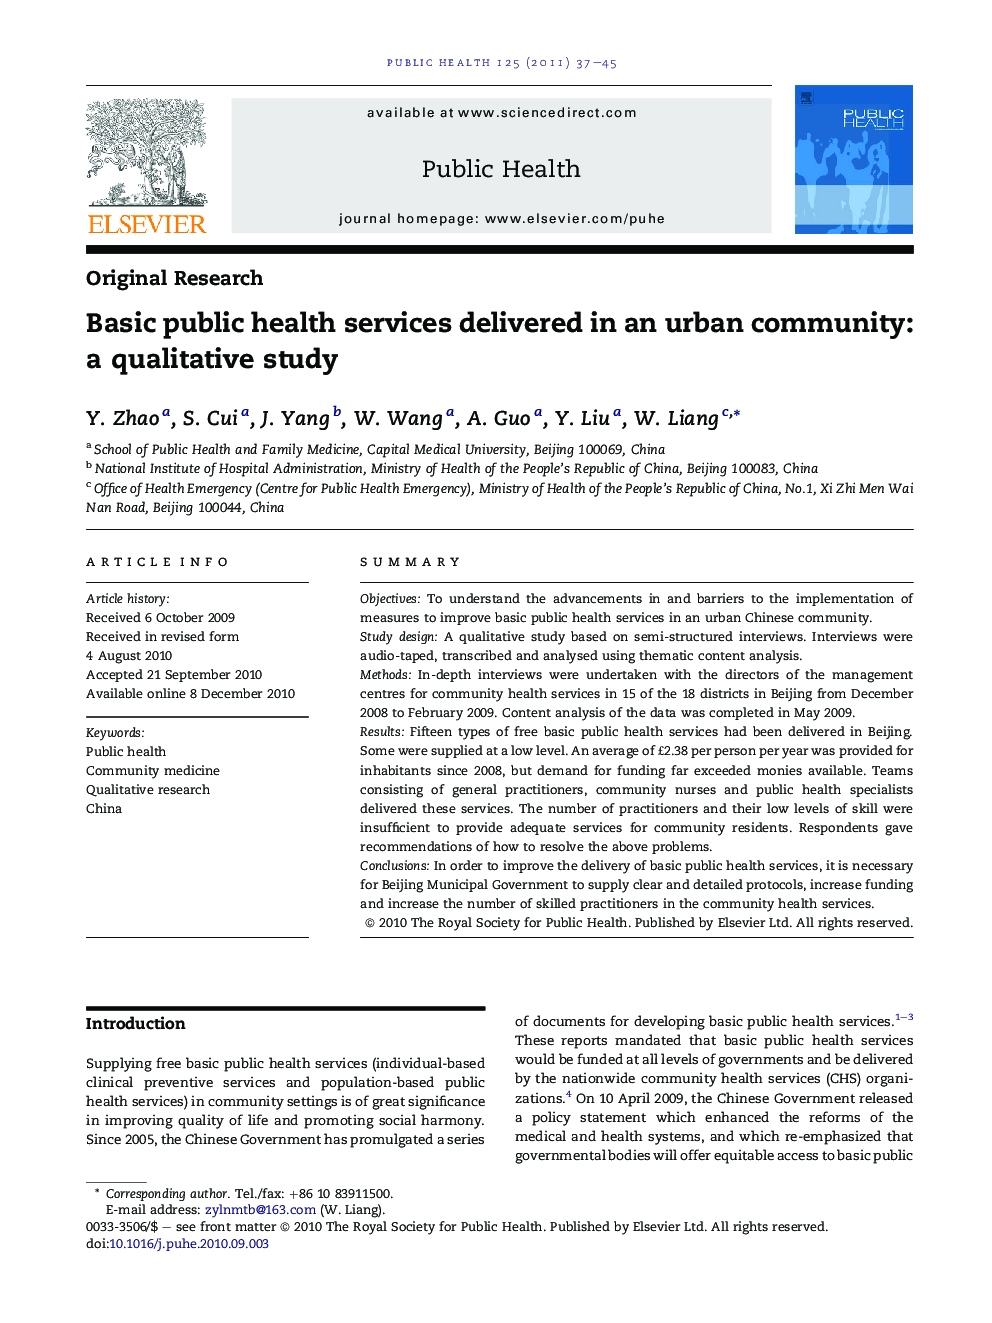 Basic public health services delivered in an urban community: a qualitative study